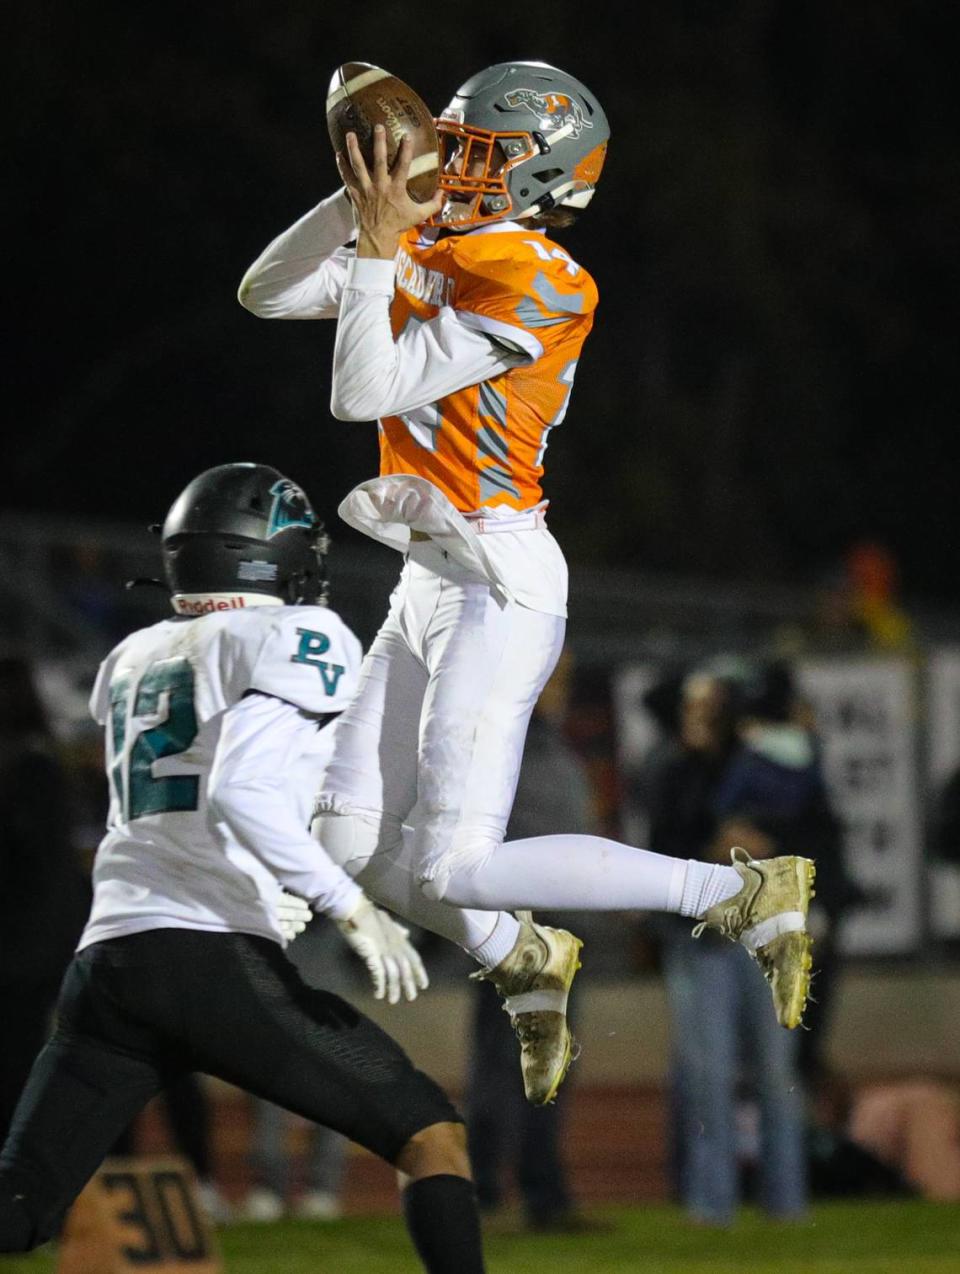 Mason Degnan seals the game with an interception. Atascadero High School beat Pioneer Valley 27-13 to win the Division V, 2022 CIF Central Section Football Championships Nov. 25, 2022.